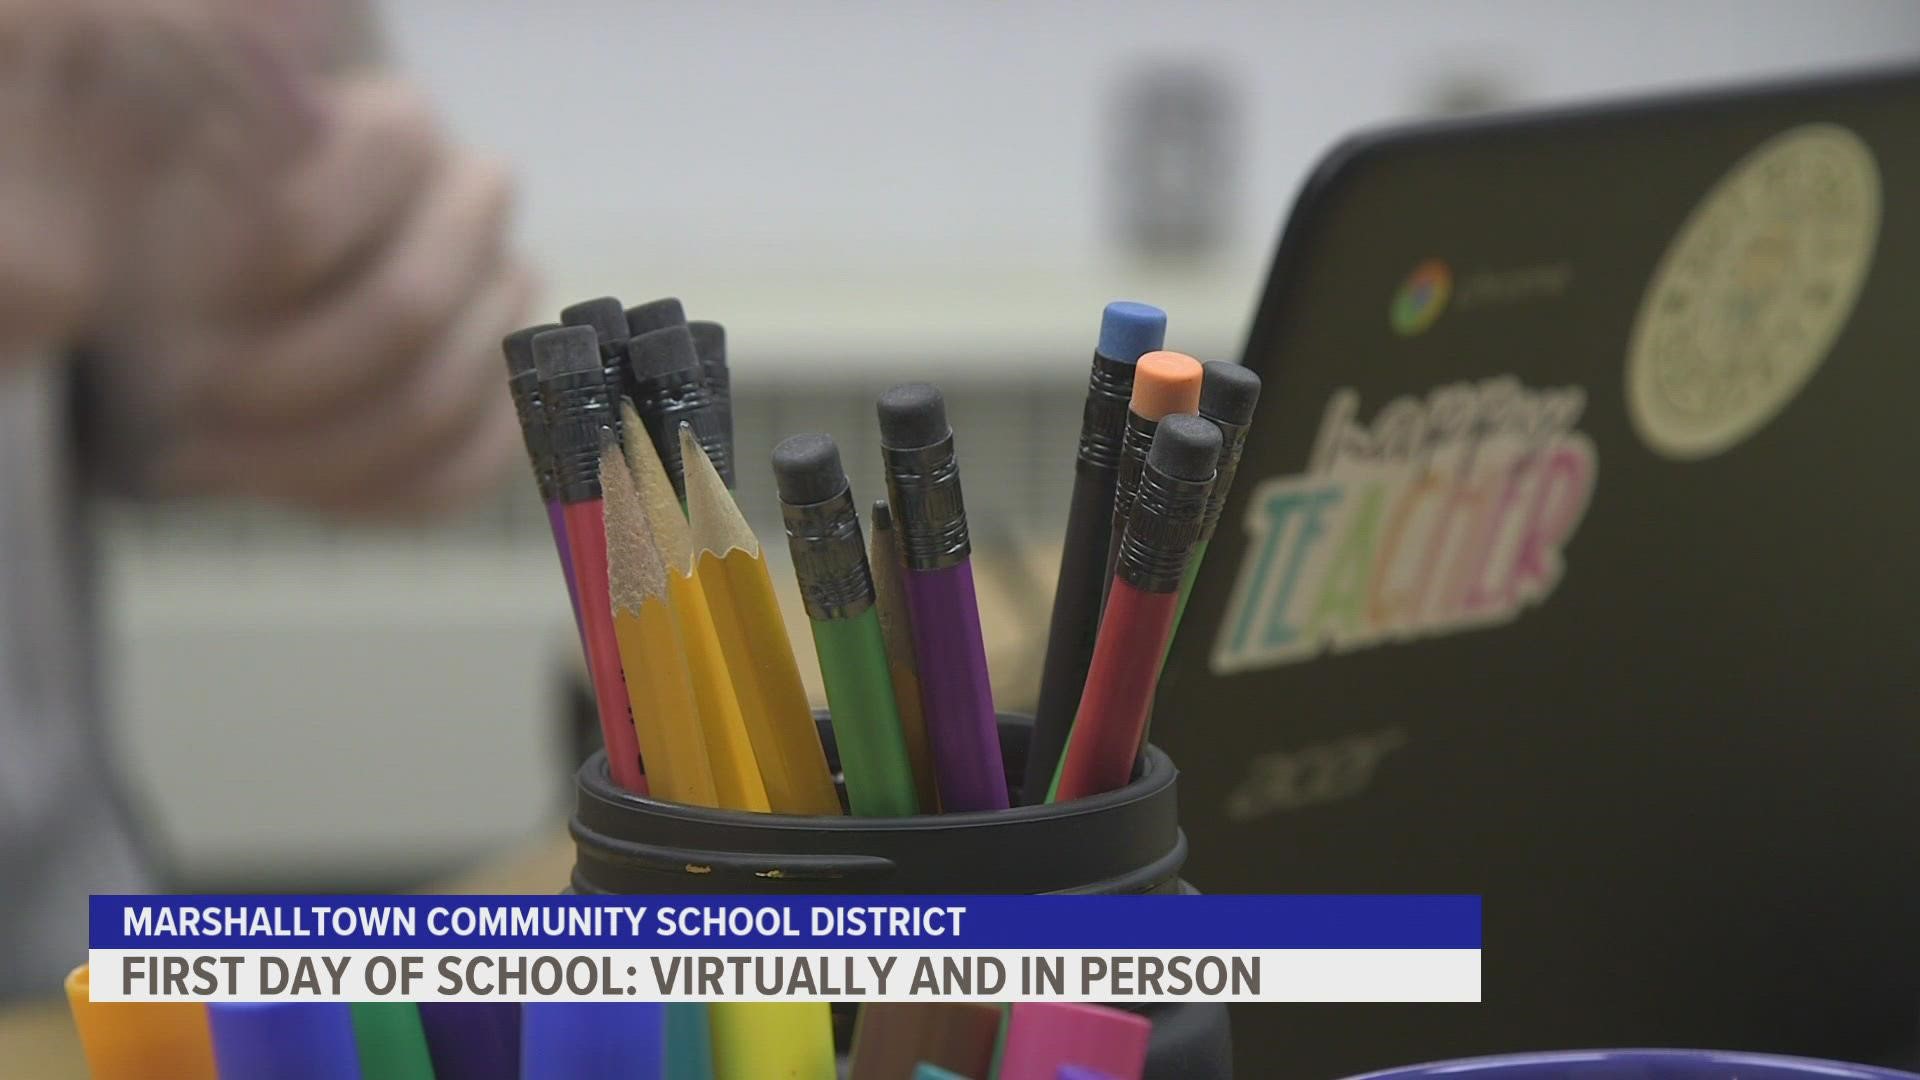 The district says nearly 150 students are enrolled in the online option for grades K-12.